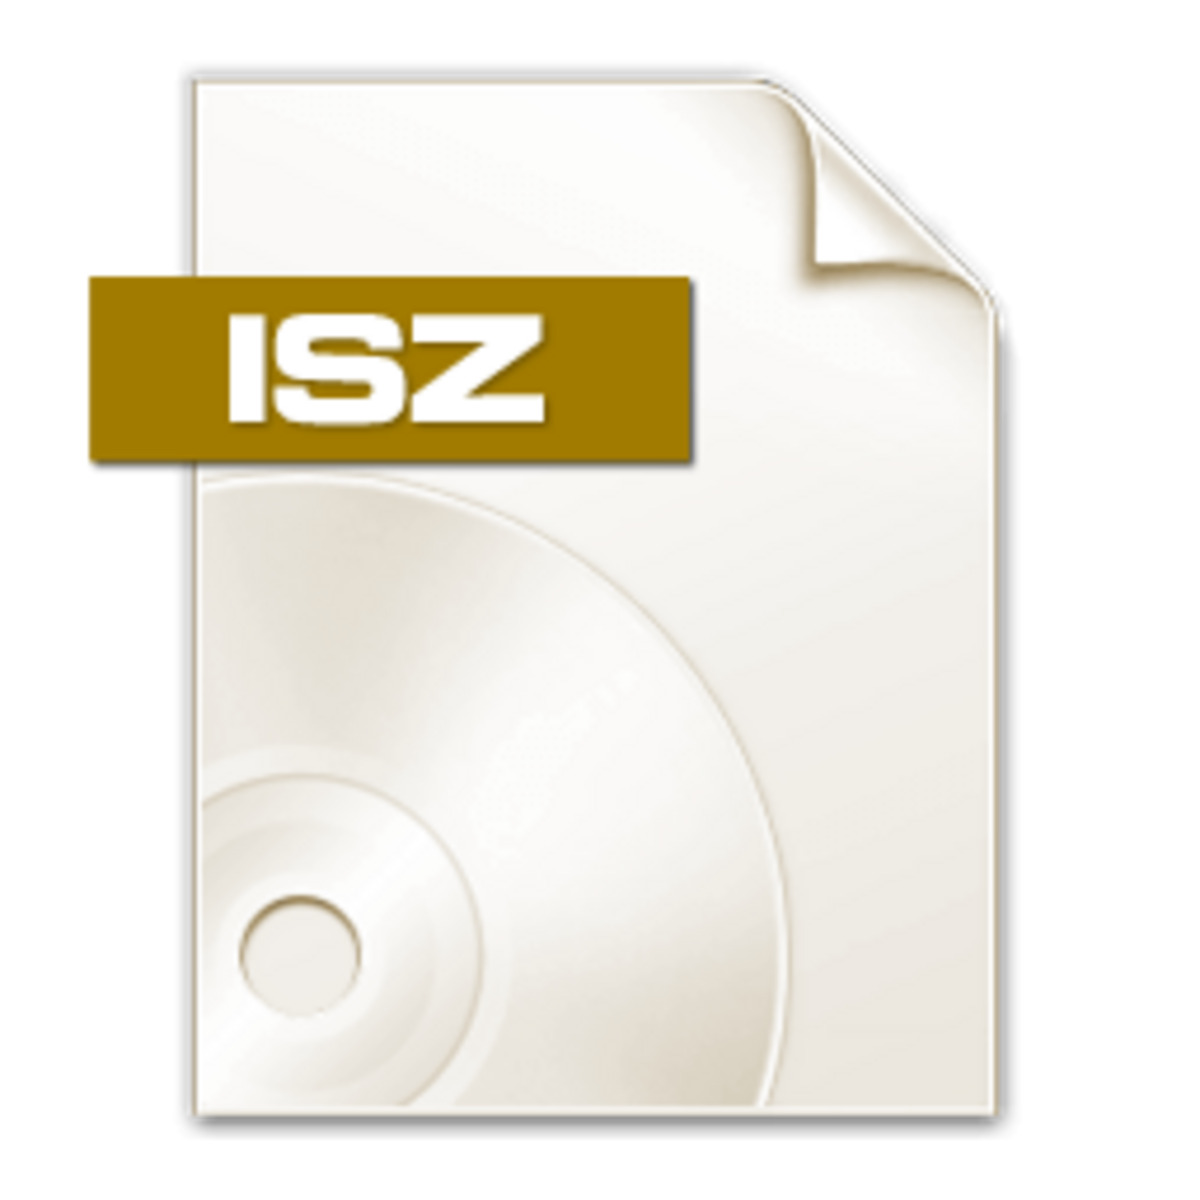 isz-file-what-it-is-and-how-to-open-one